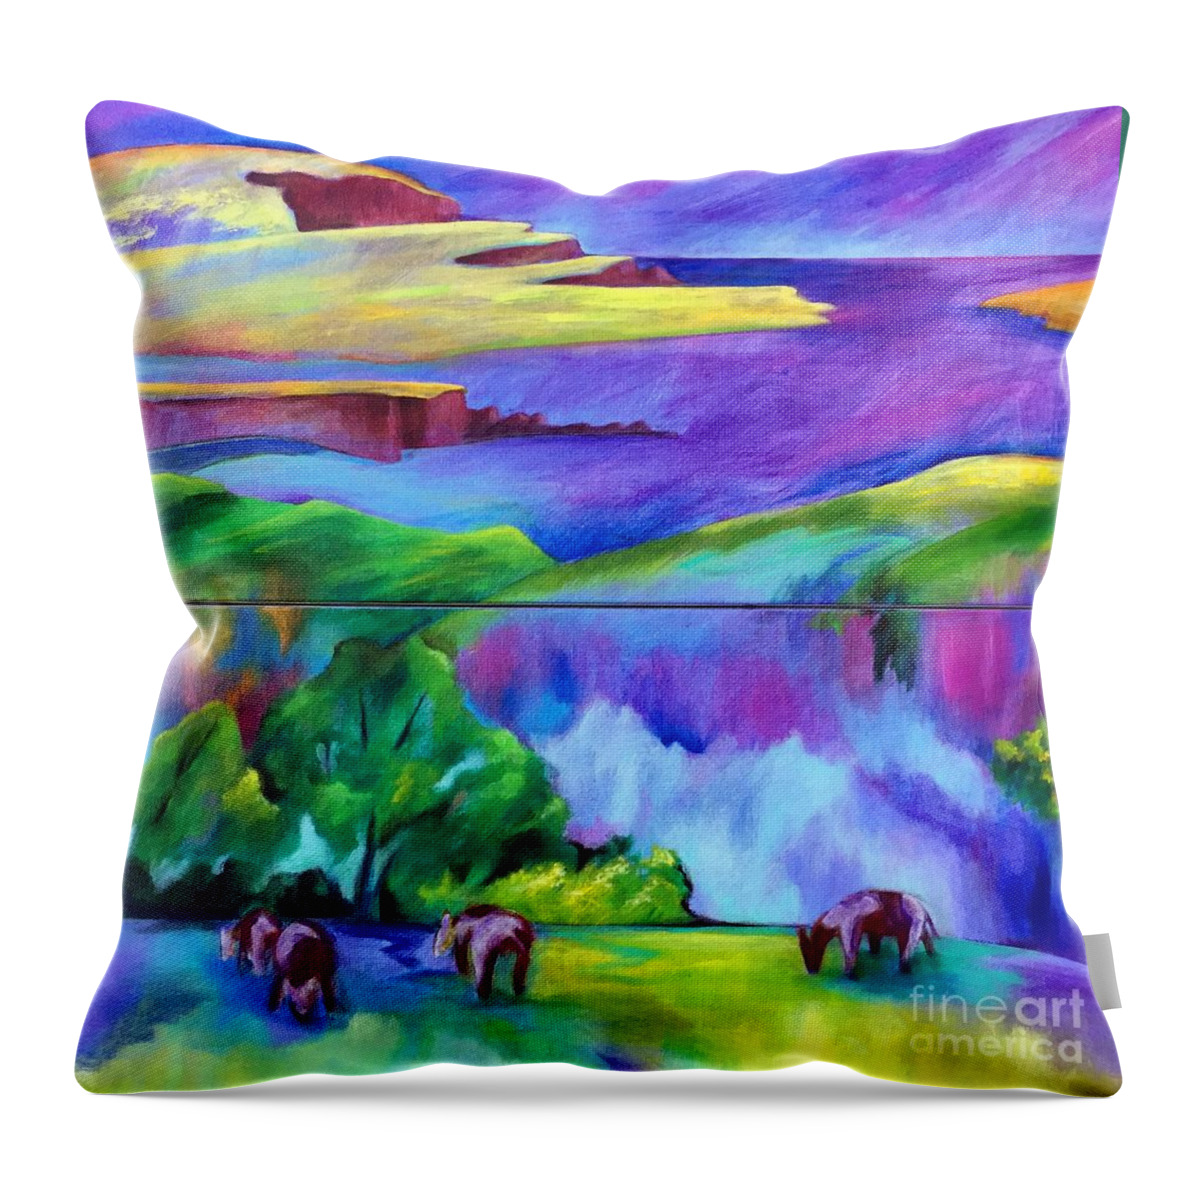 Dingle Coast Throw Pillow featuring the painting Purple Graze by Elizabeth Fontaine-Barr